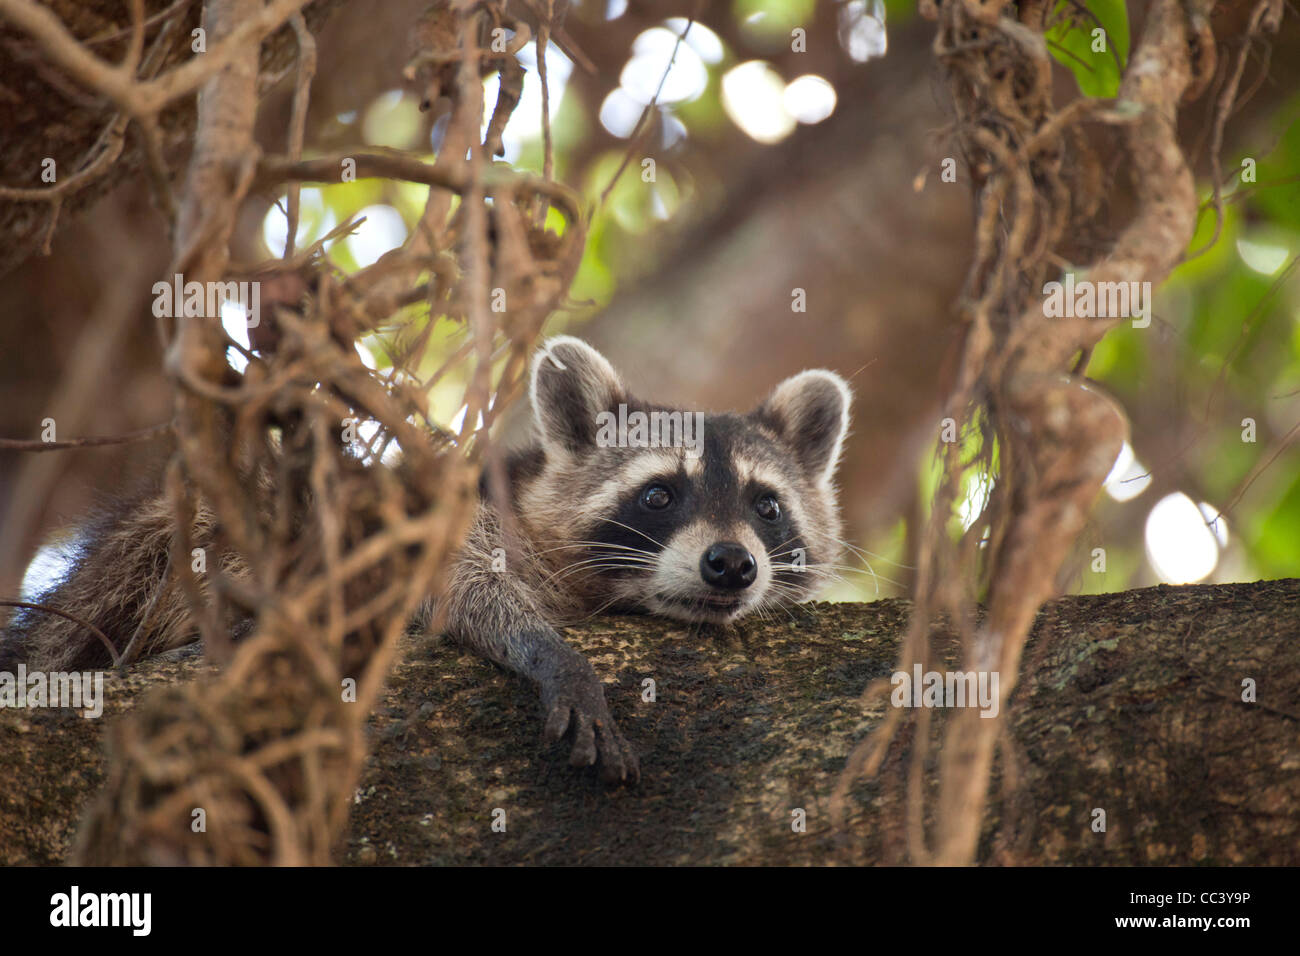 North American raccoon (Procyon lotor) in a tree, Hugh Taylor Birch State Park in Fort Lauderdale, Brower County, Florida, USA Stock Photo